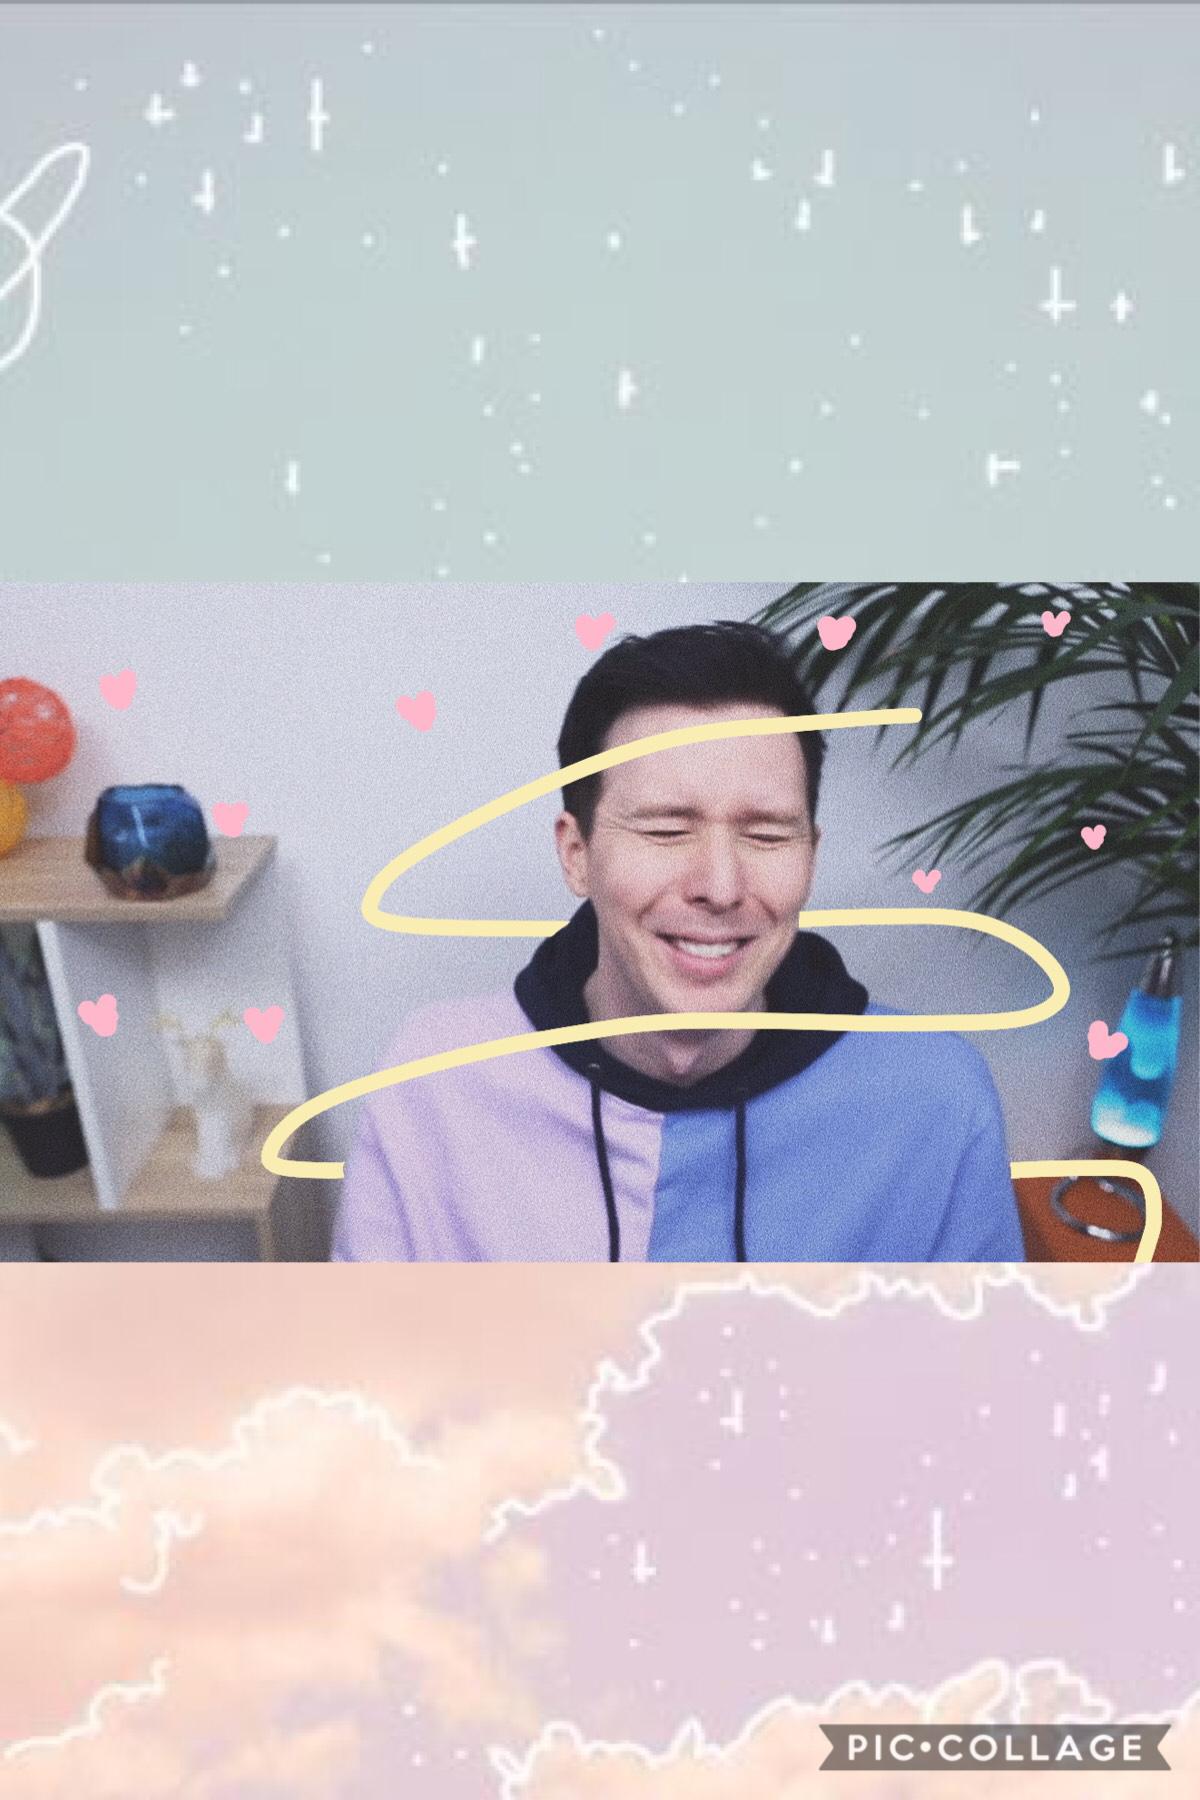 phil looks so GOOD in his new video i’m 🥺🥺🥺